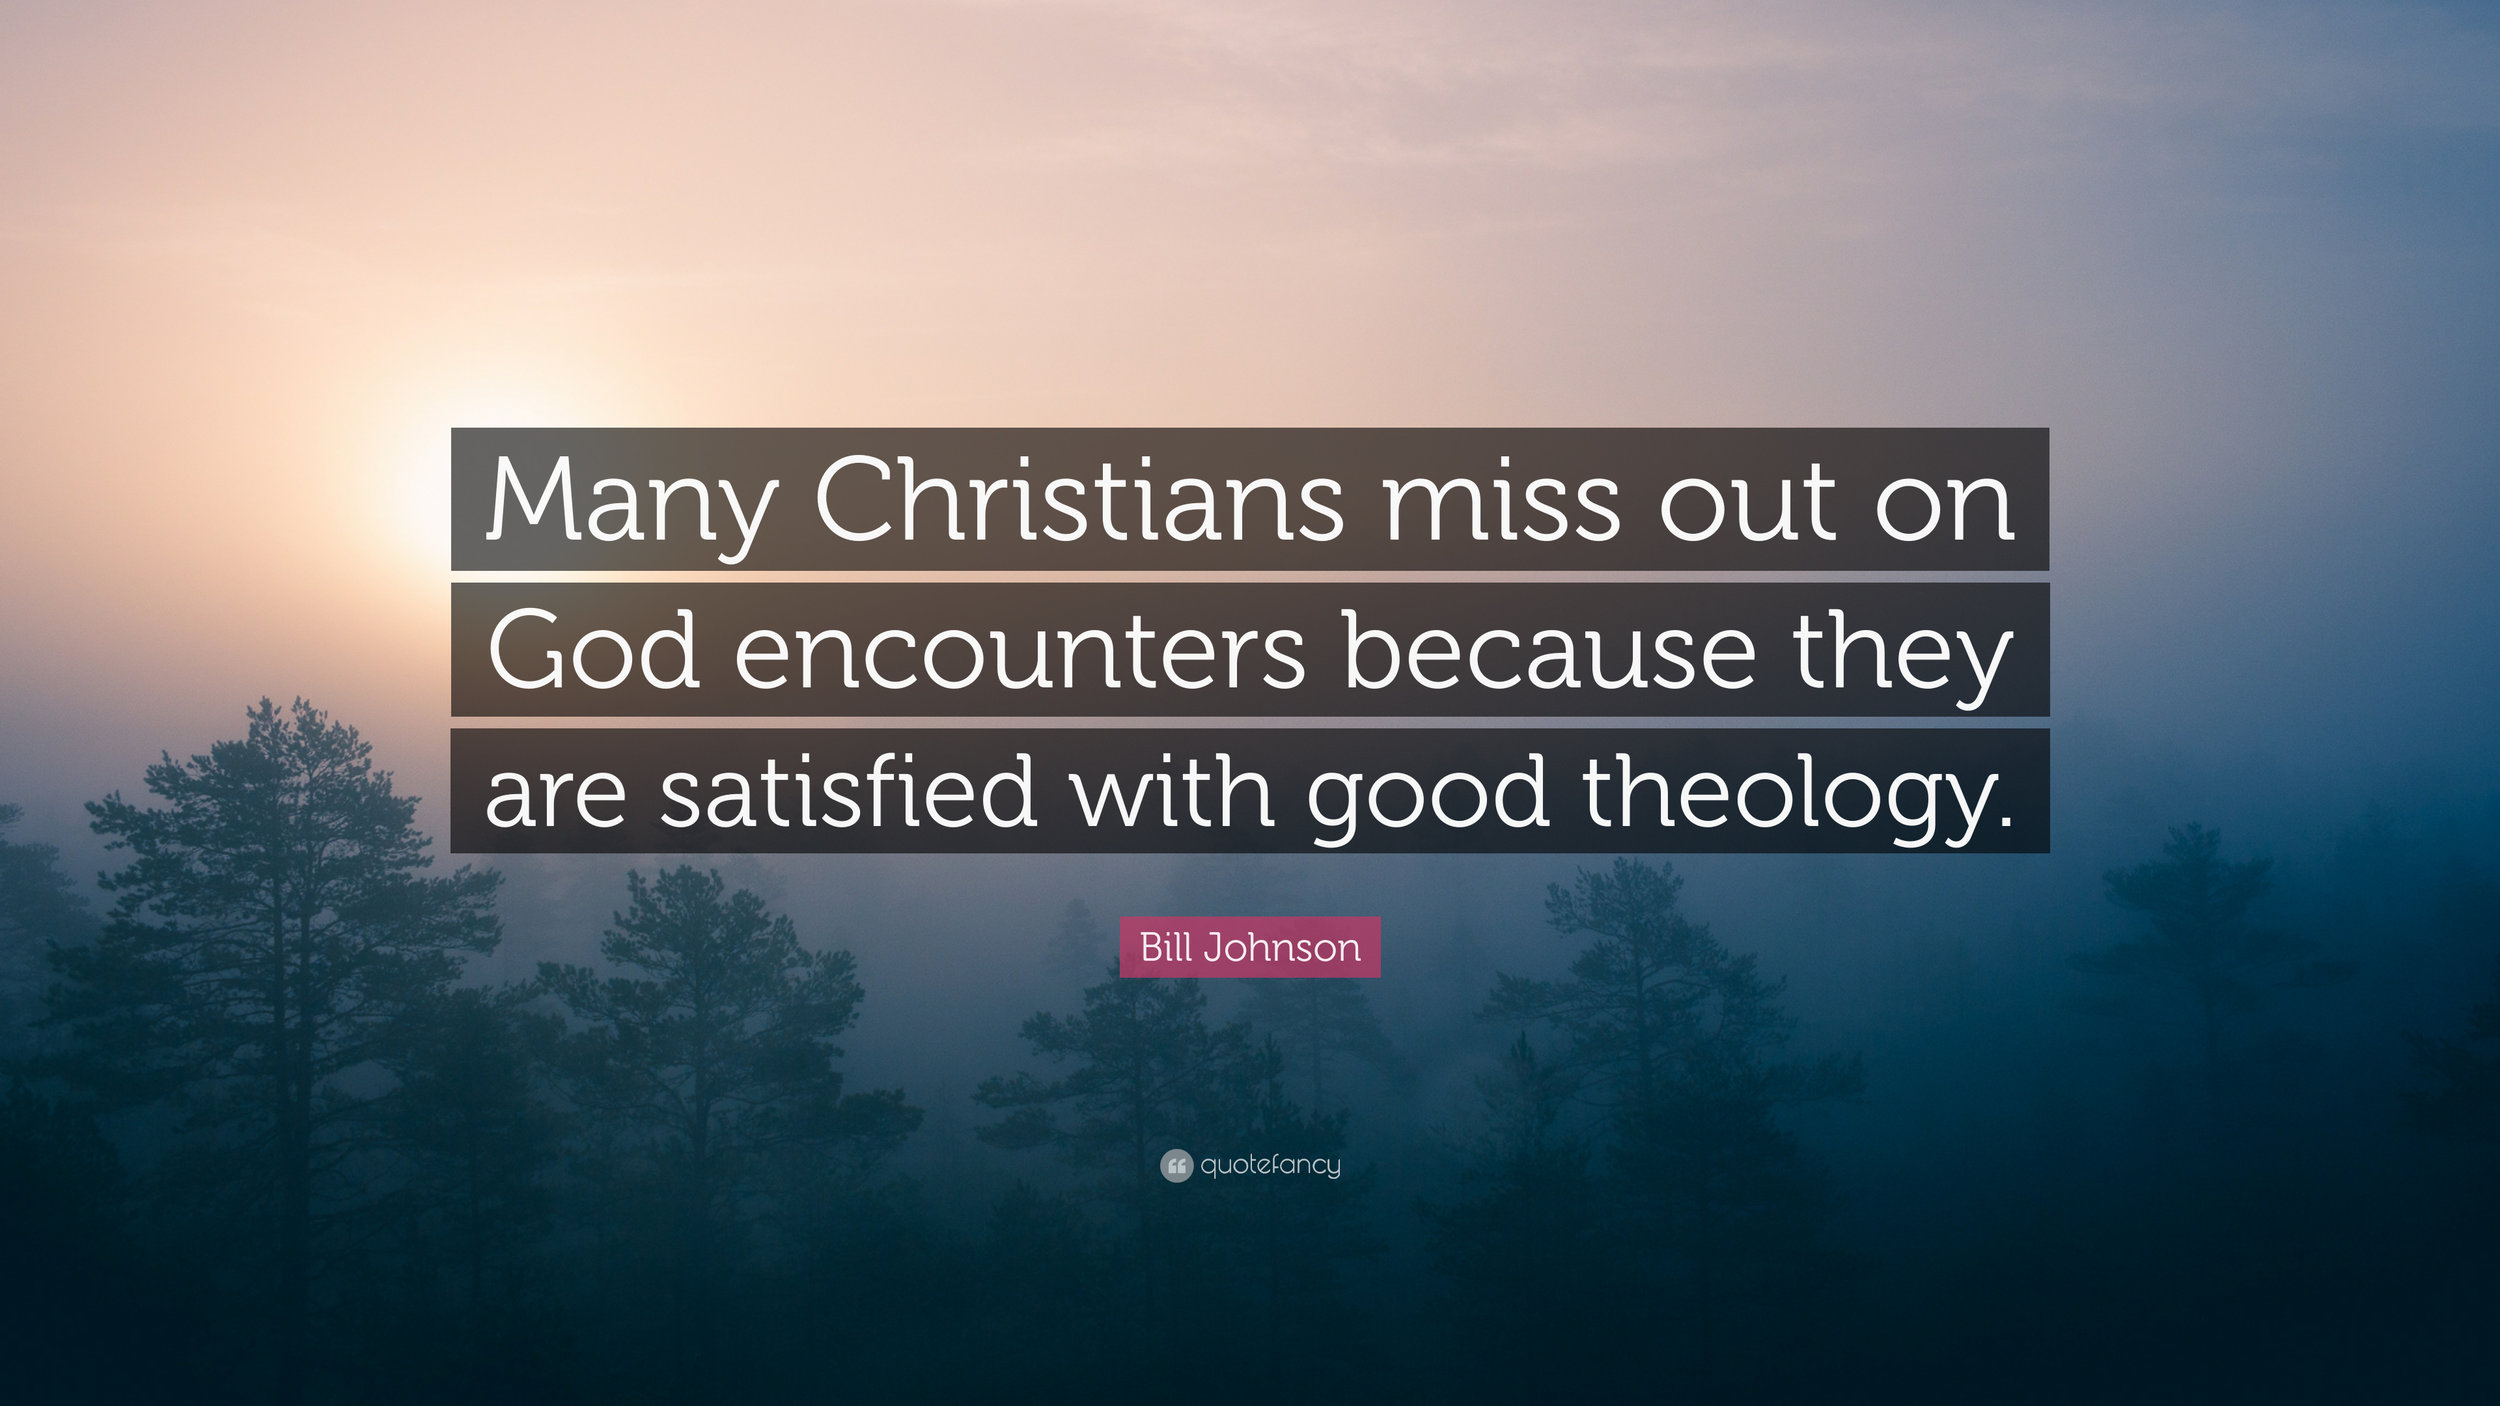 4937568-Bill-Johnson-Quote-Many-Christians-miss-out-on-God-encounters.jpg